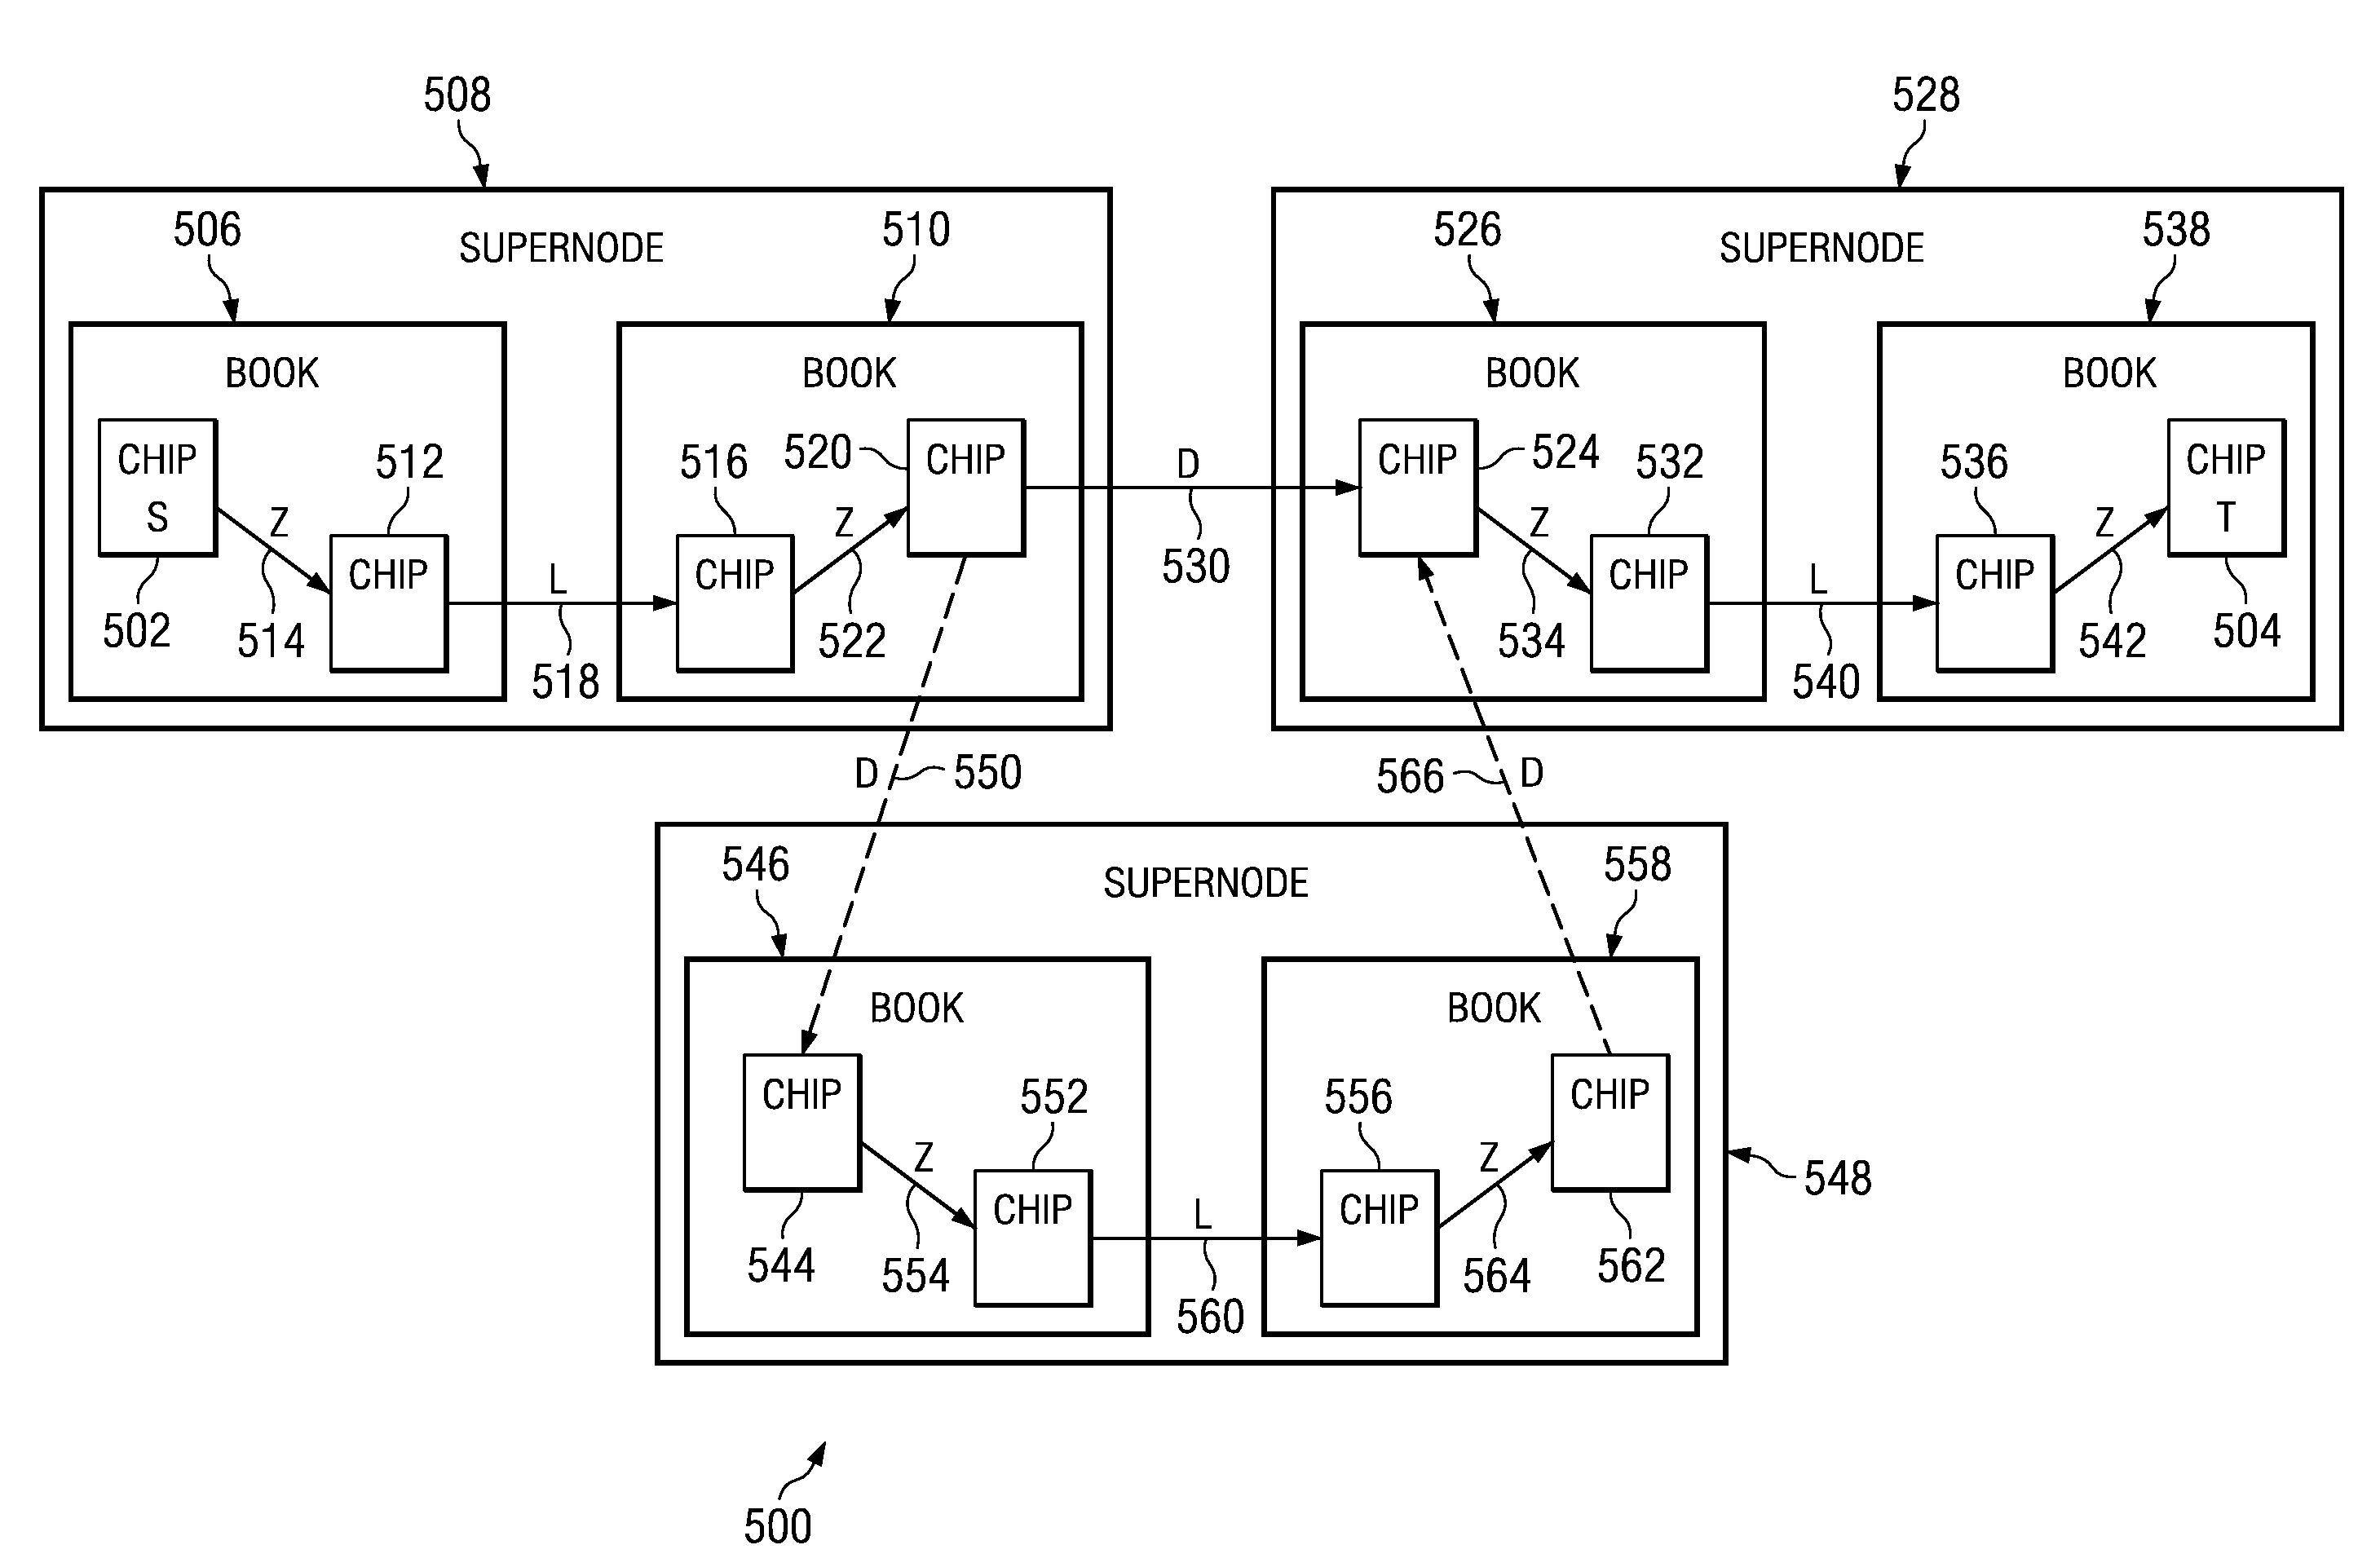 System and Method for Providing Multiple Redundant Direct Routes Between Supernodes of a Multi-Tiered Full-Graph Interconnect Architecture